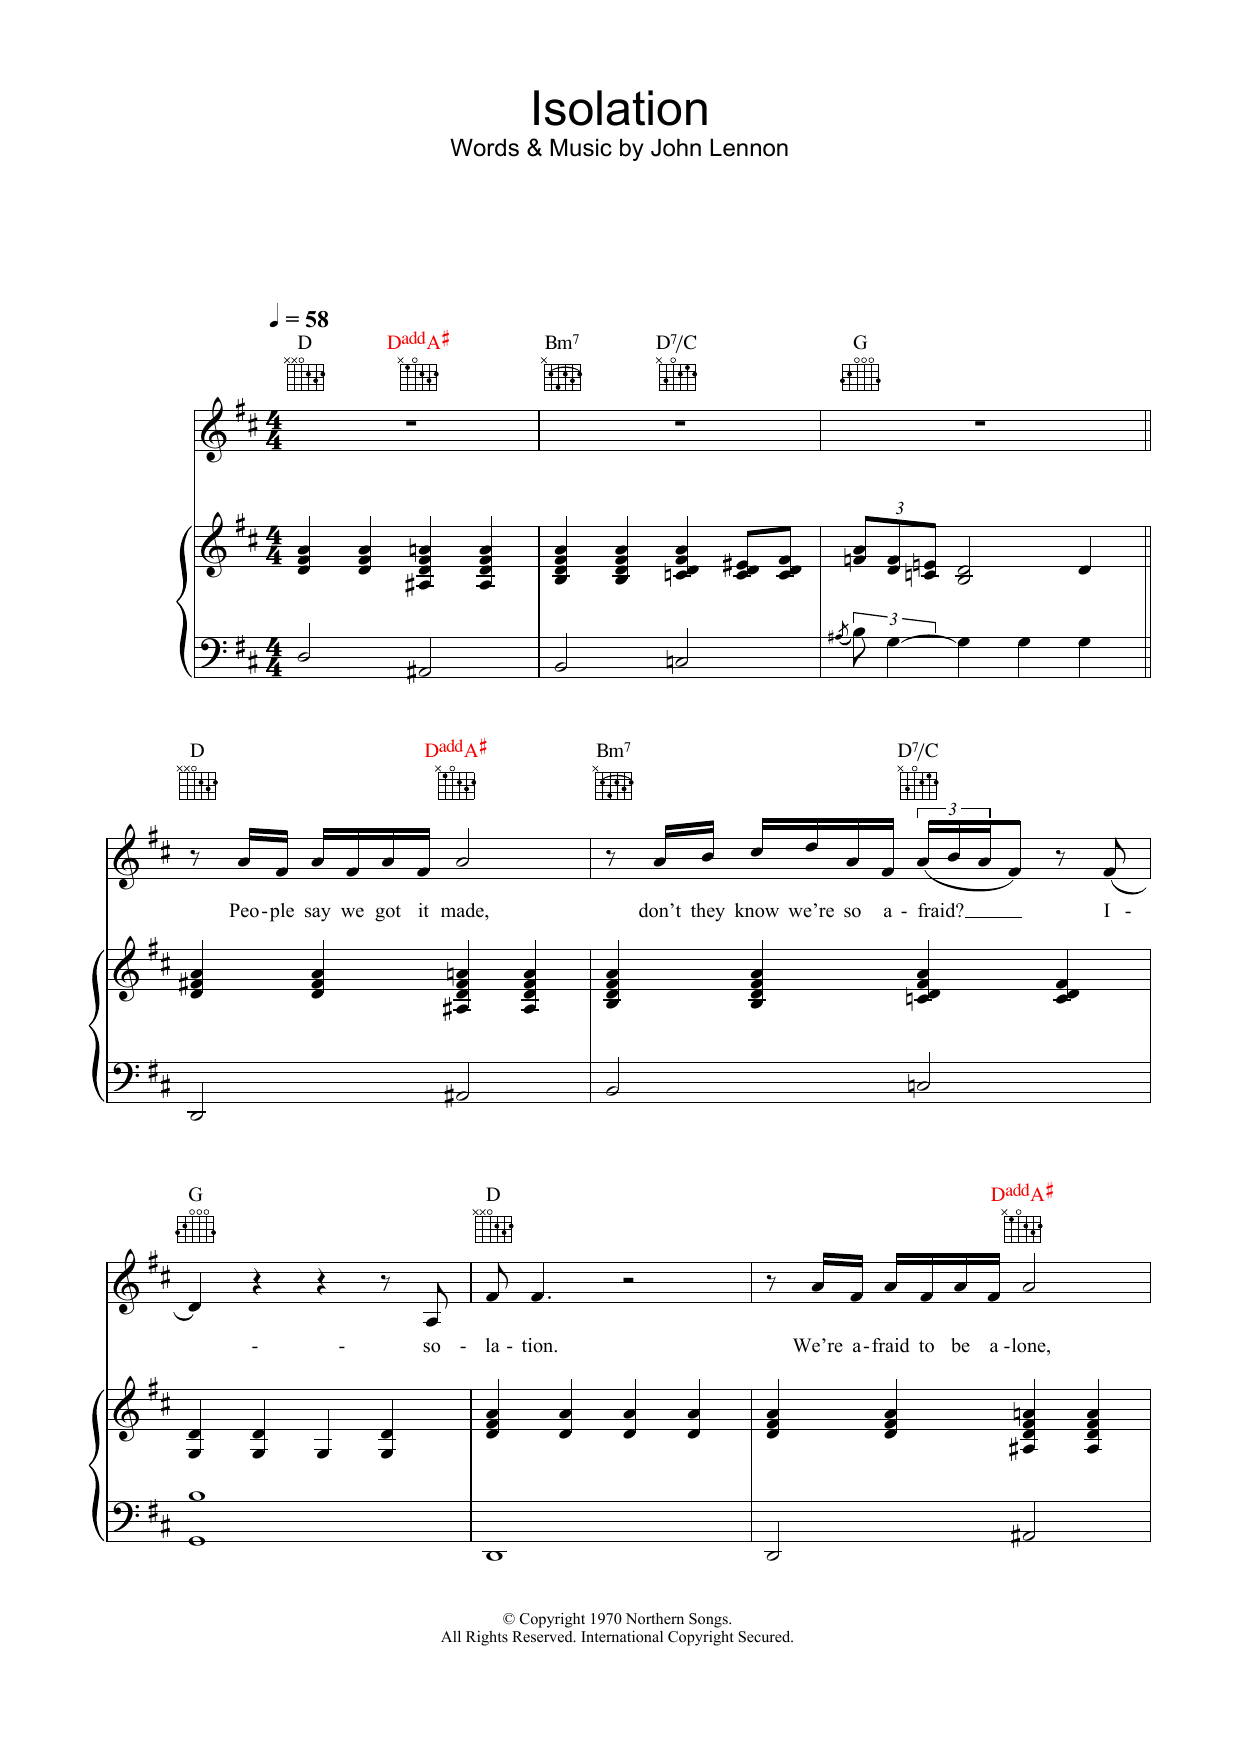 John Lennon Isolation sheet music notes and chords. Download Printable PDF.